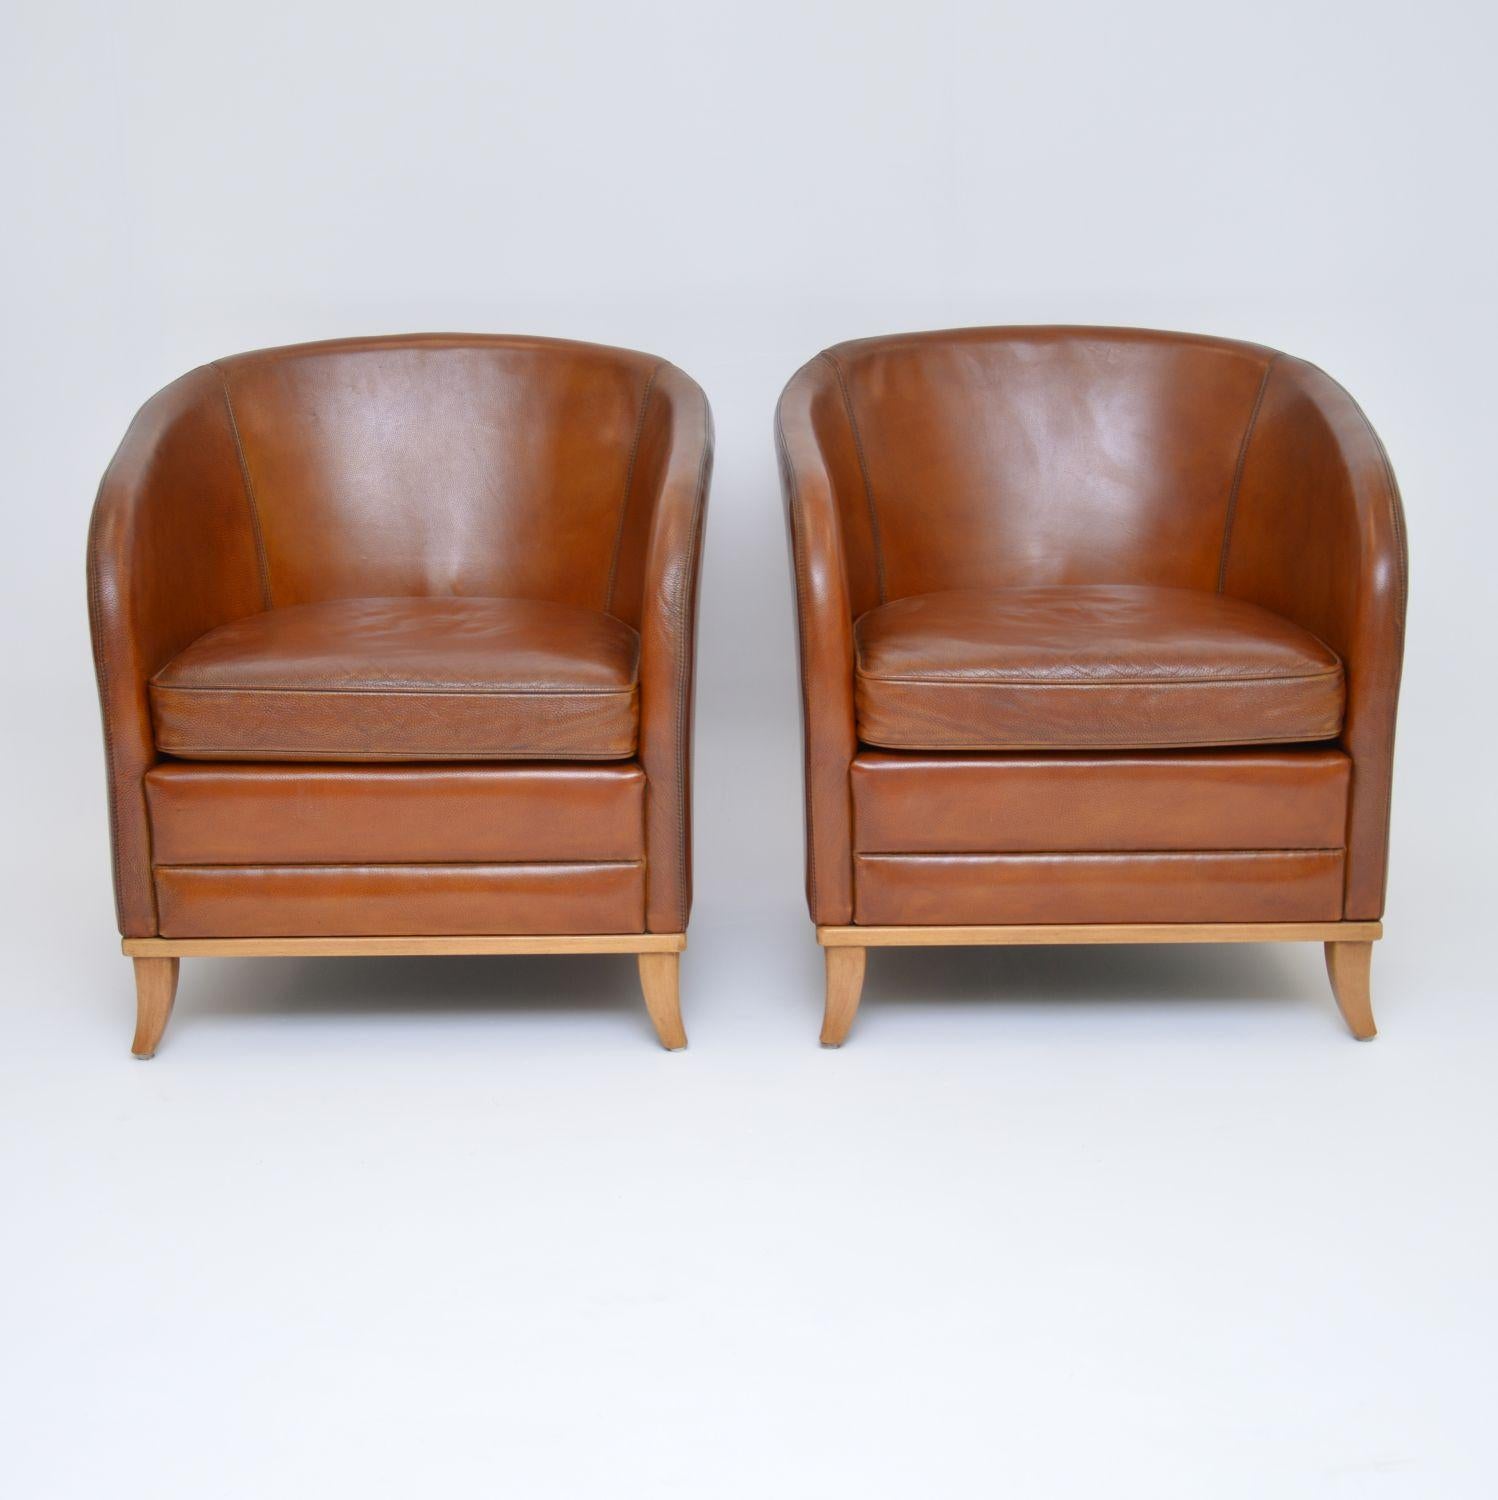 This pair of Swedish vintage leather armchairs by Bröderna Anderssons have just arrived from Sweden. They are in excellent original condition & date from around the 1950s period. The leather which has been professionally cleaned & polished has a